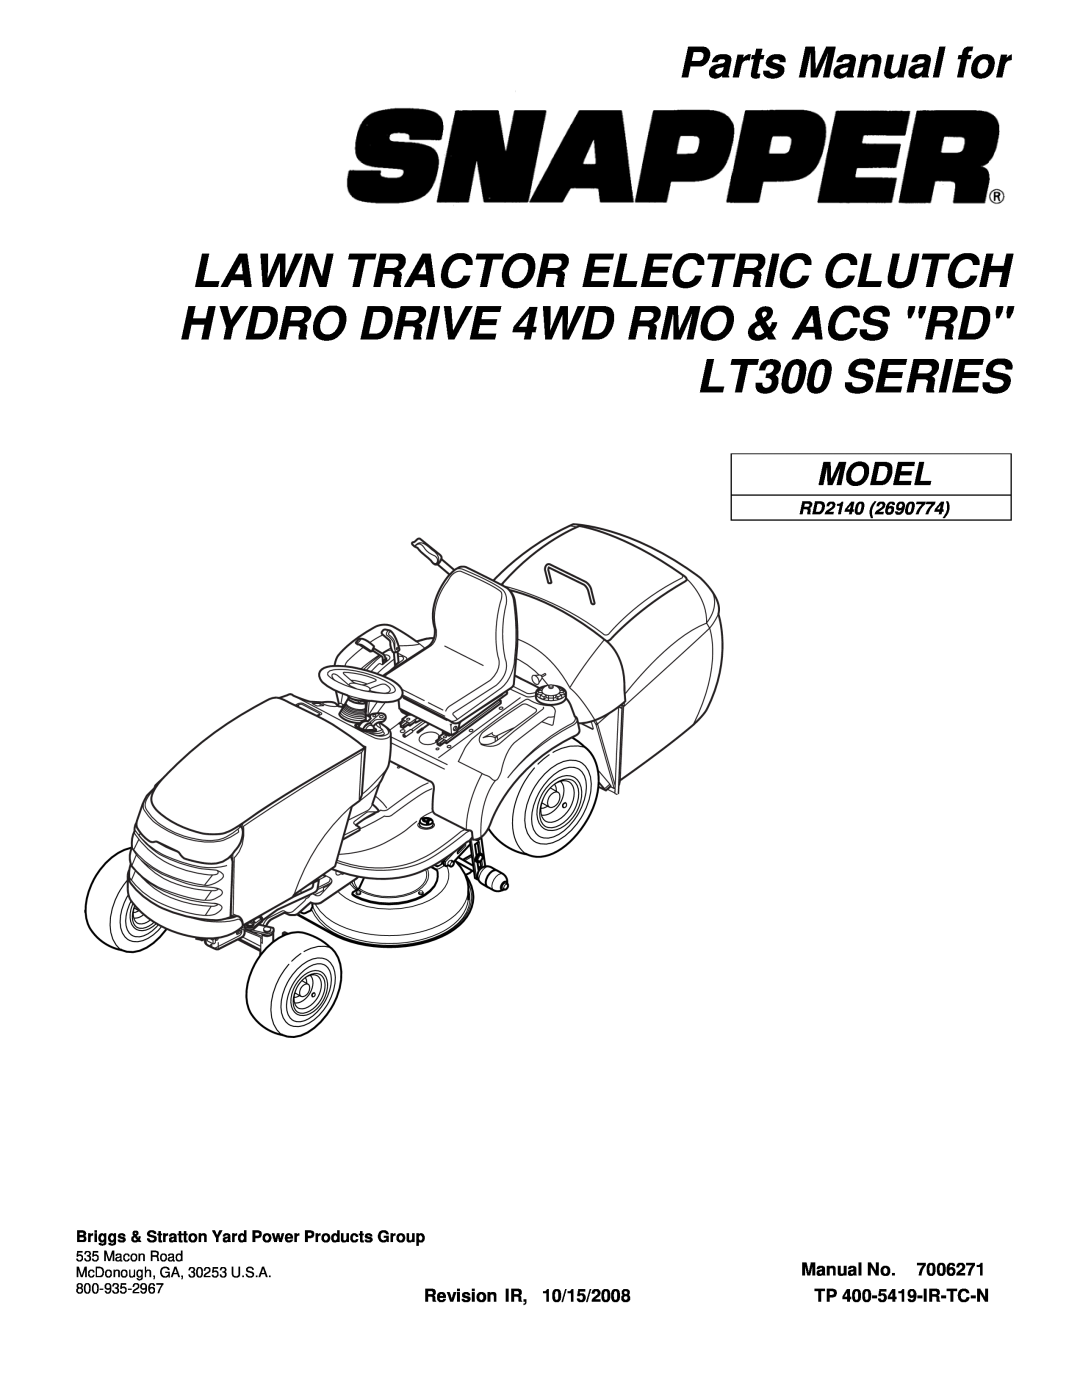 Snapper RD2140 (2690774) manual LT300 SERIES, Parts Manual for, Model, Briggs & Stratton Yard Power Products Group 